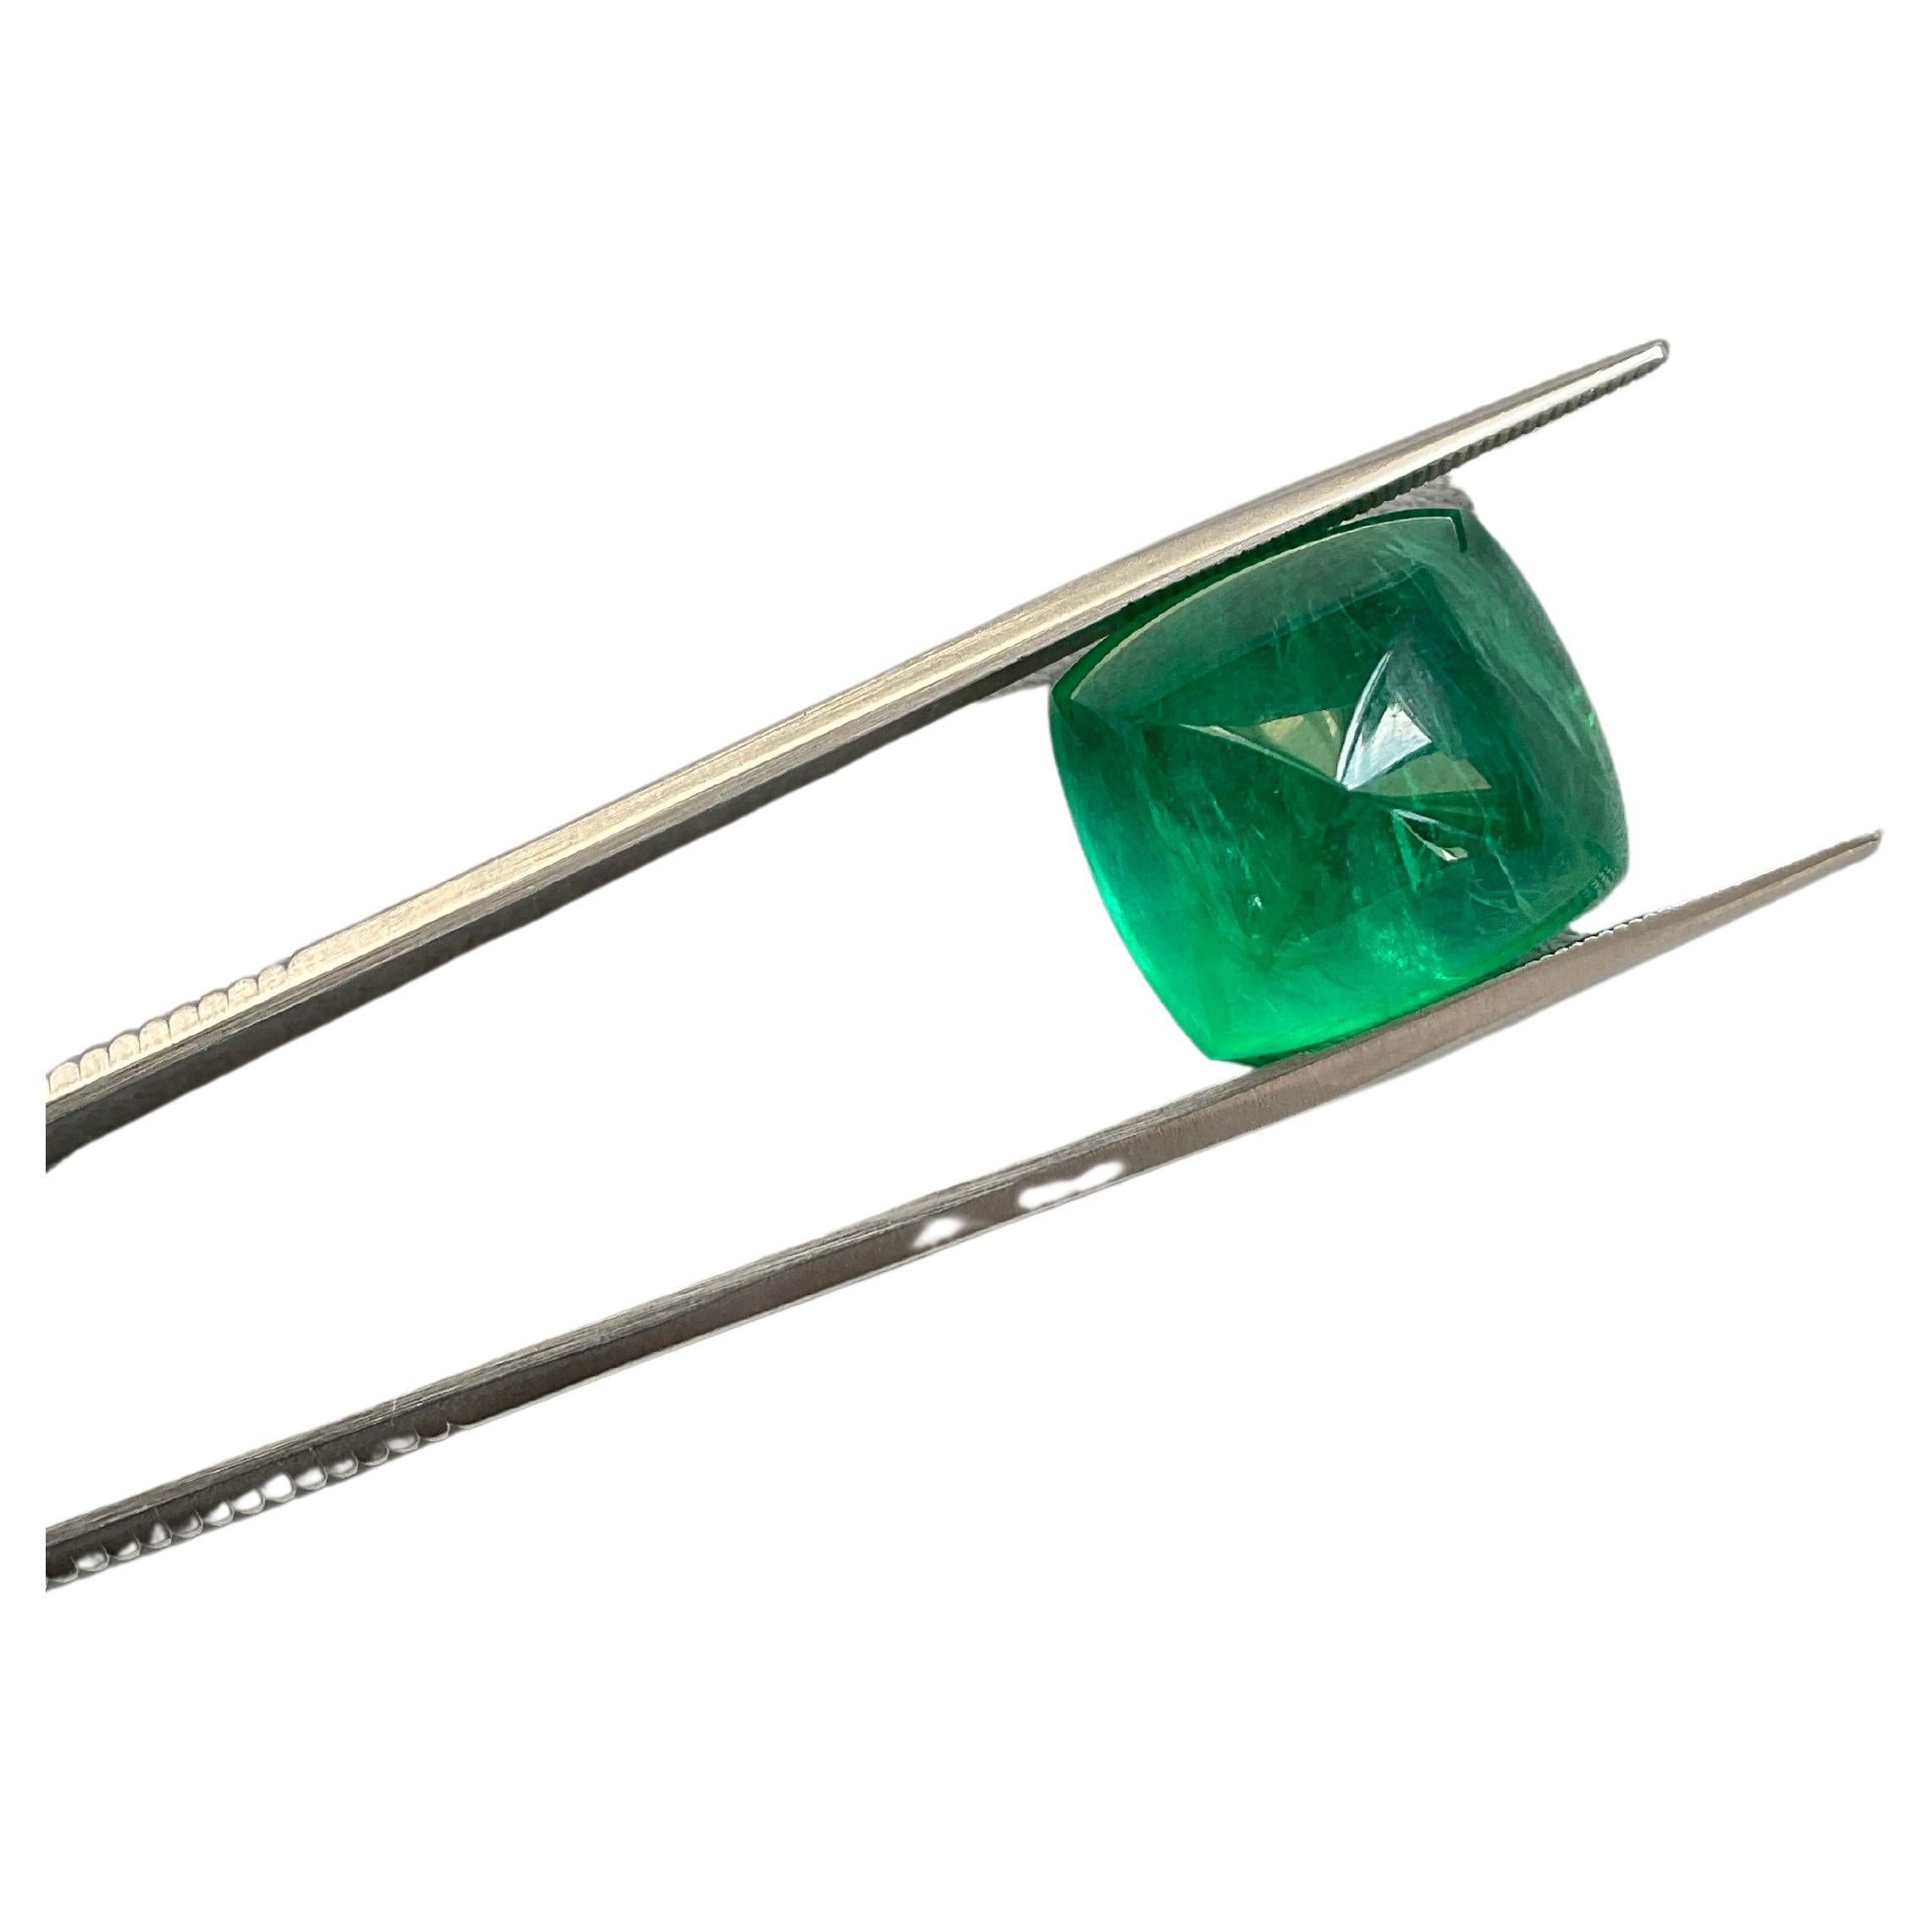 Certified 25.38 Cts Zambian Emerald Sugarloaf Cabochon Top Quality Natural Gem For Sale